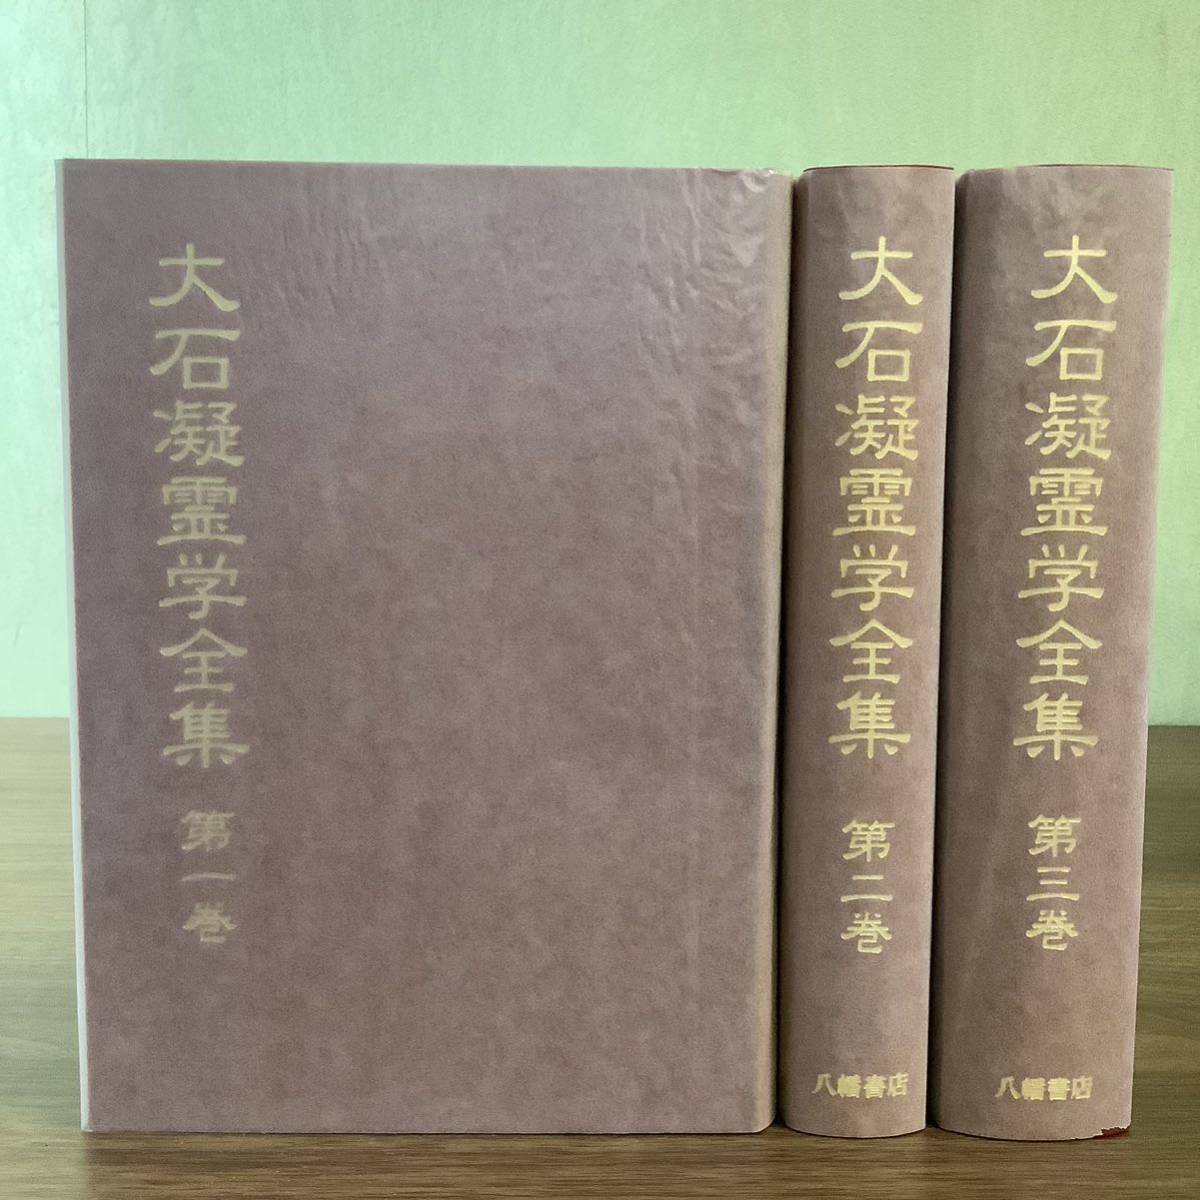 2KO345{ rare large stone ... complete set of works 1 volume ~3 volume all 3 volume . set } large stone . genuine element beautiful / work Hachiman bookstore Heisei era 17 year issue the first version old Shinto .. Omiya ... attaching publication beautiful book